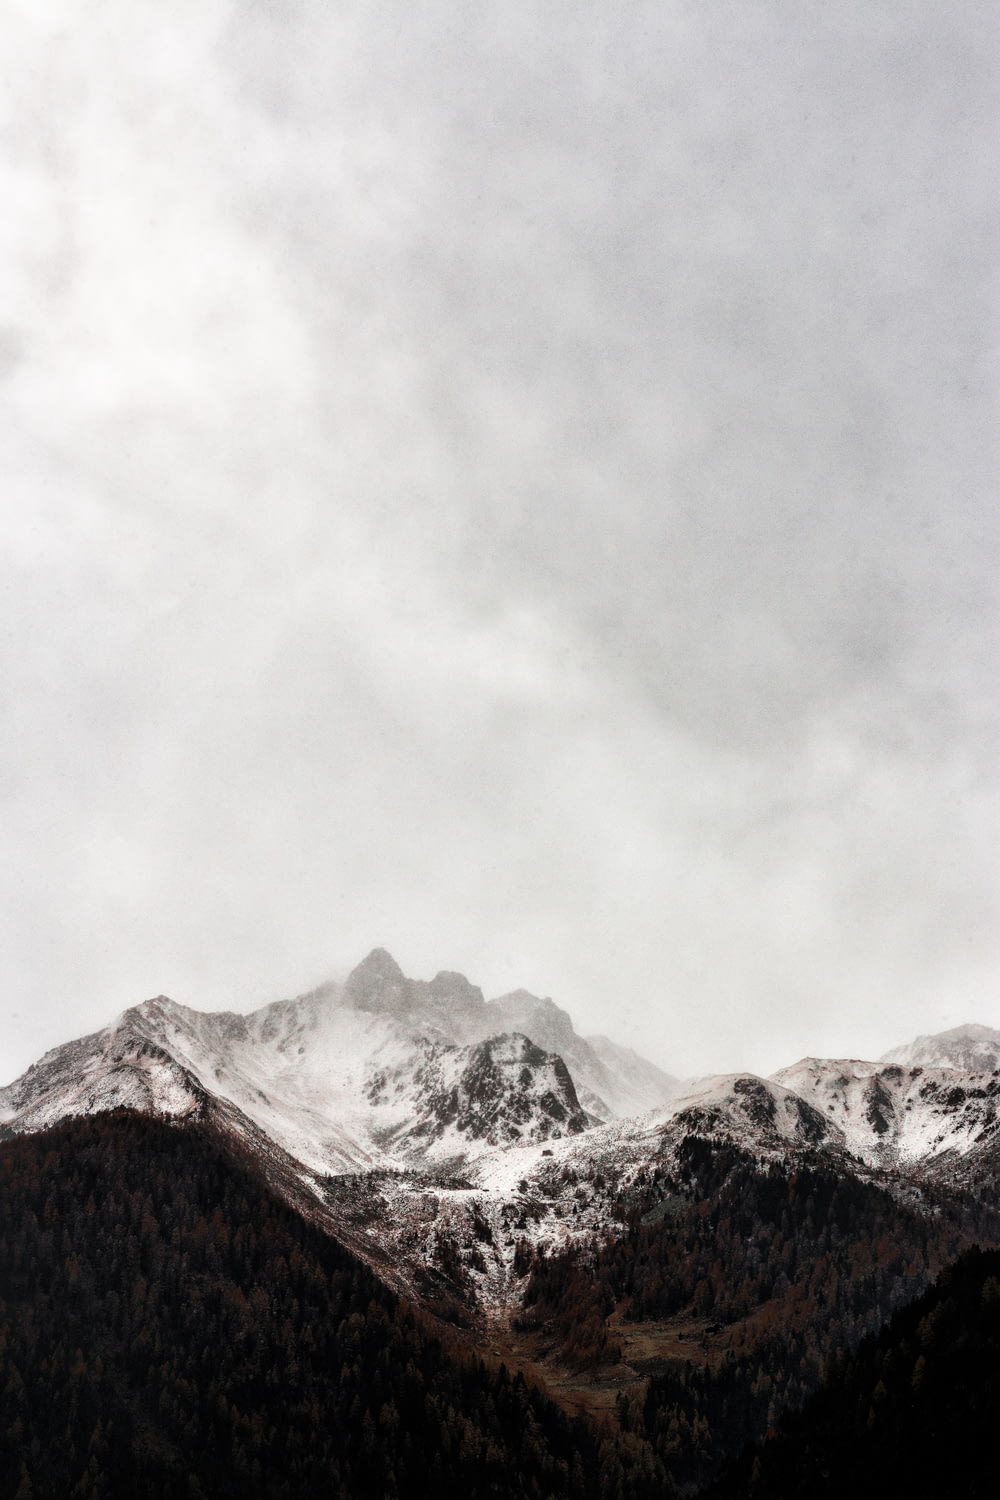 iced cap mountain under gray sky during daytime photography